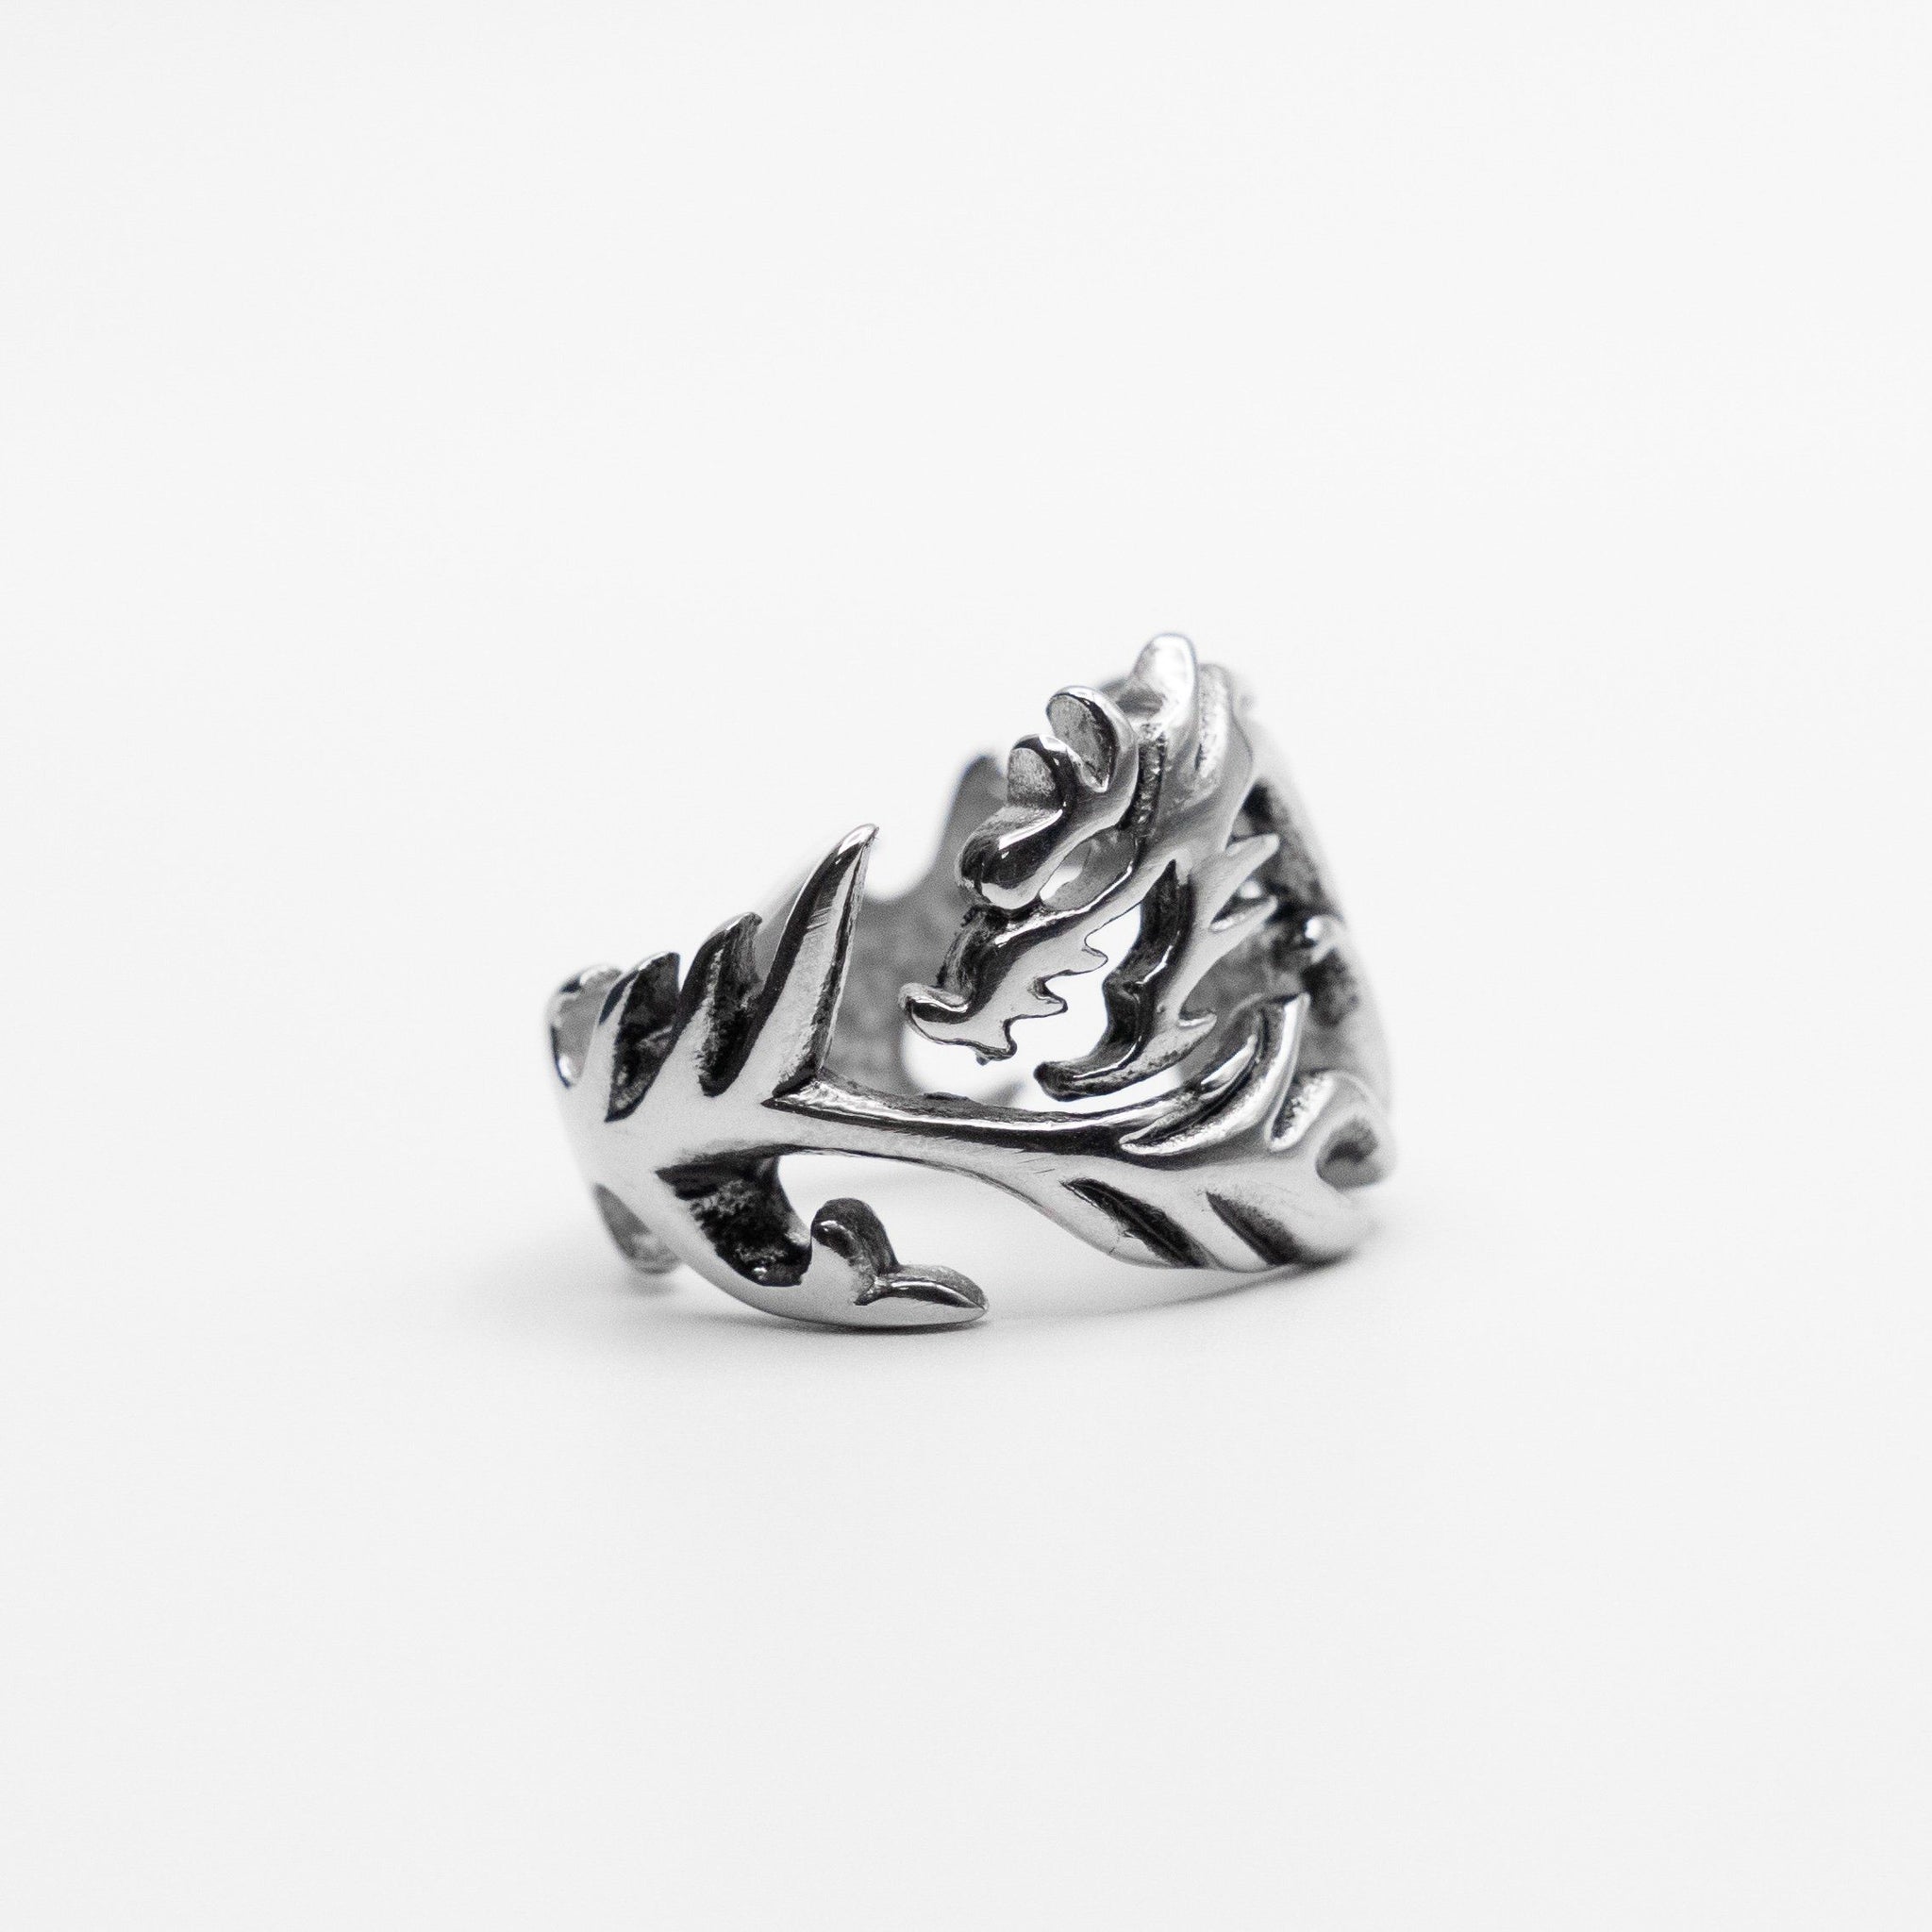 The Tormented Dragon Ring in Stainless Steel - a timeless and corrosion-resistant piece designed for everyday wear.